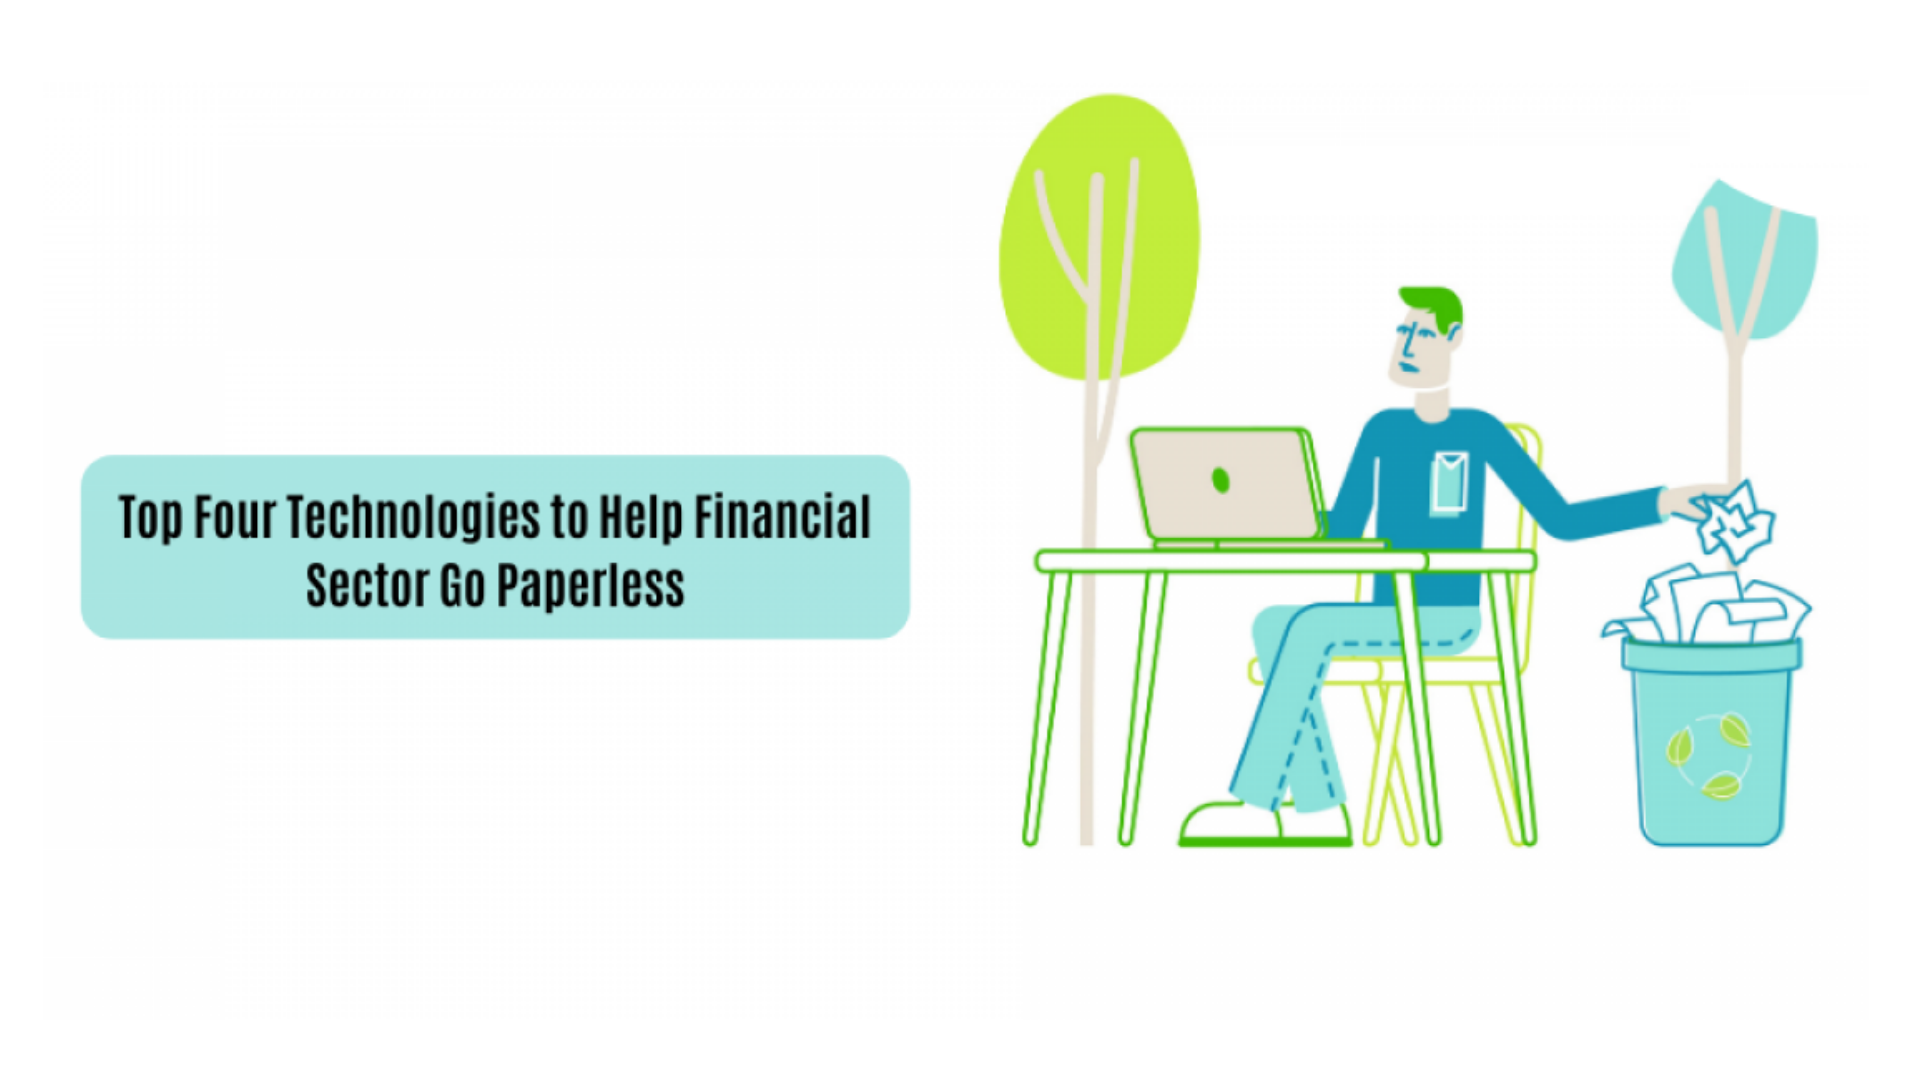 Top Four Technologies to Help Financial Sector Go Paperless